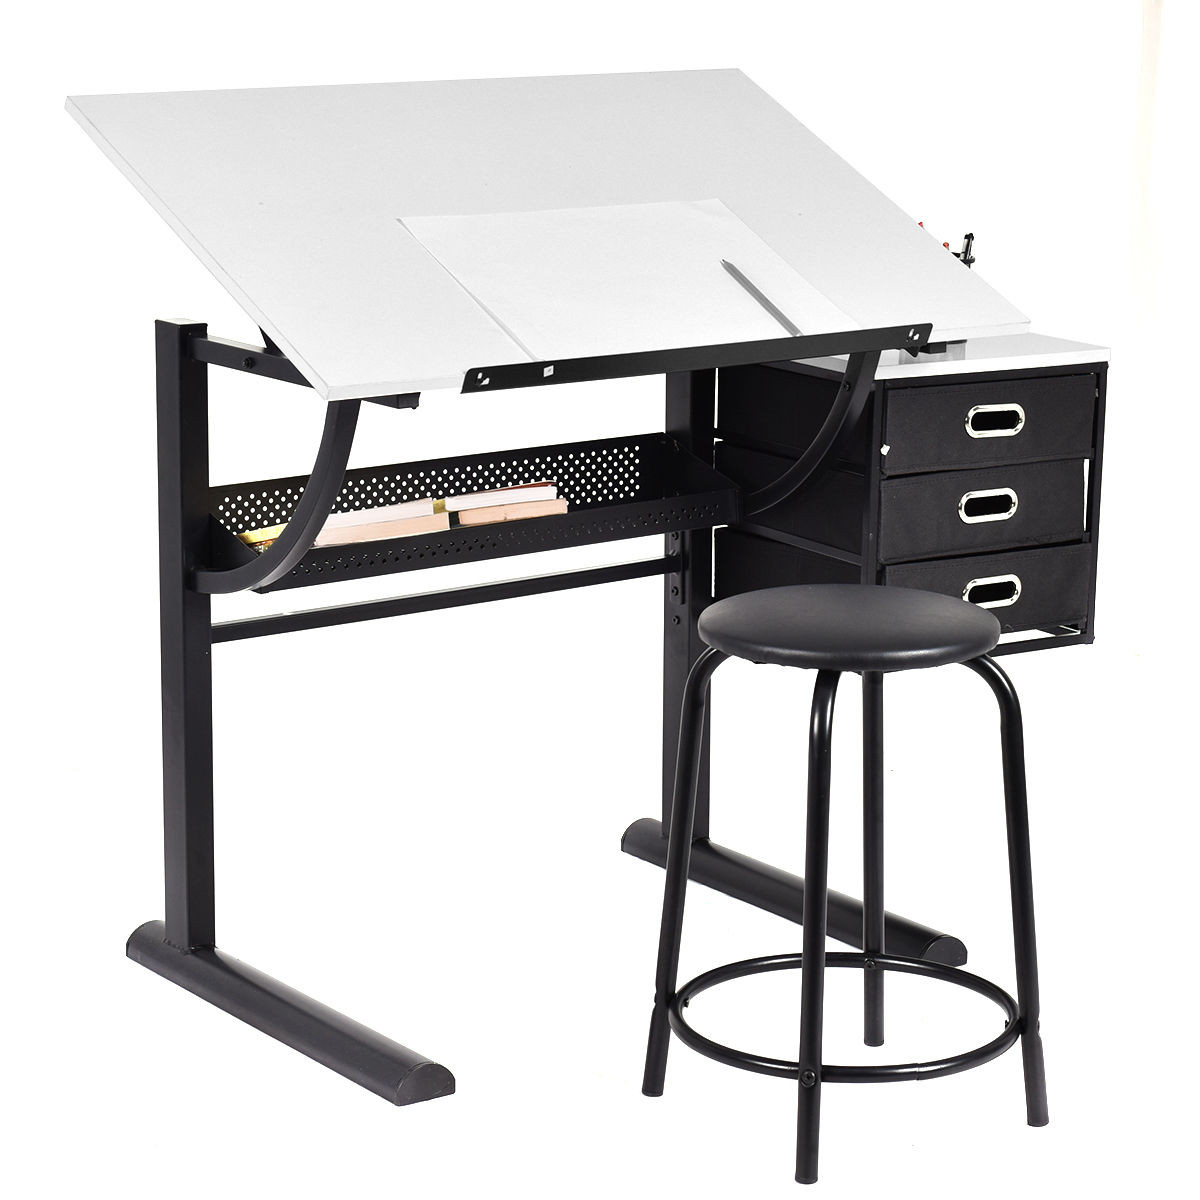 Adjustable Drafting Table Art And Craft Drawing Desk W / Stool